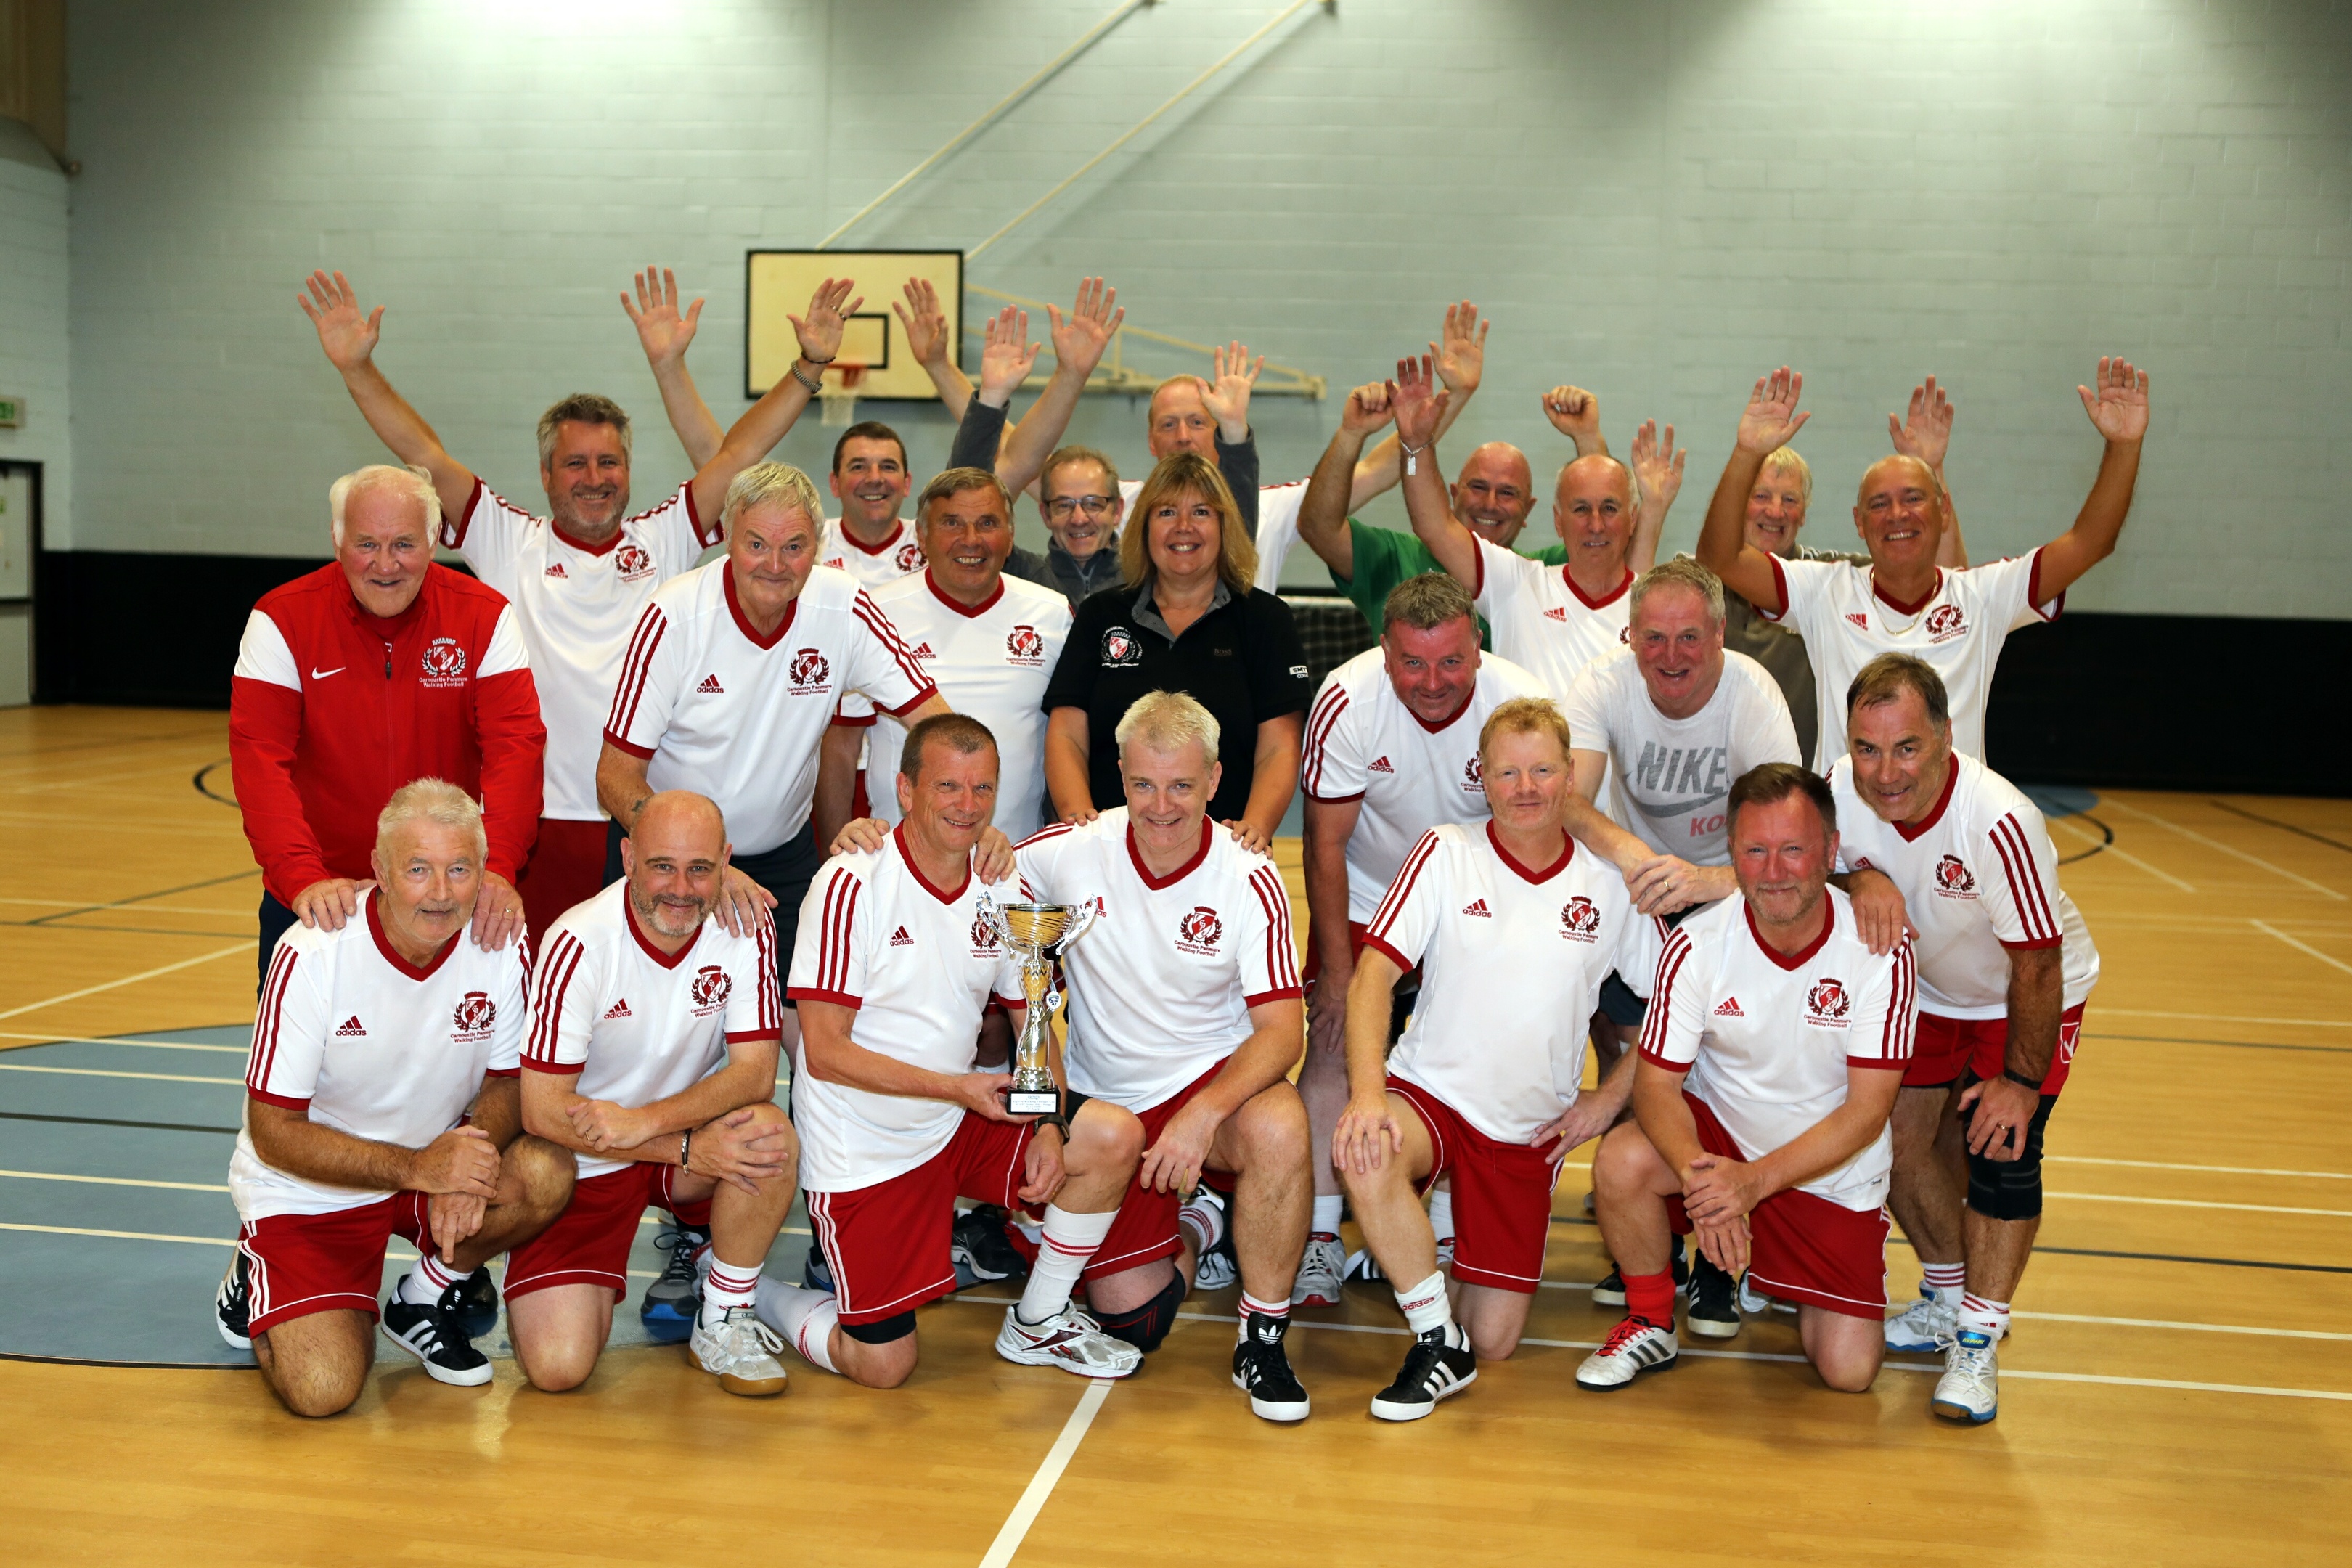 The walking footballers celebrating their success in Portugal.